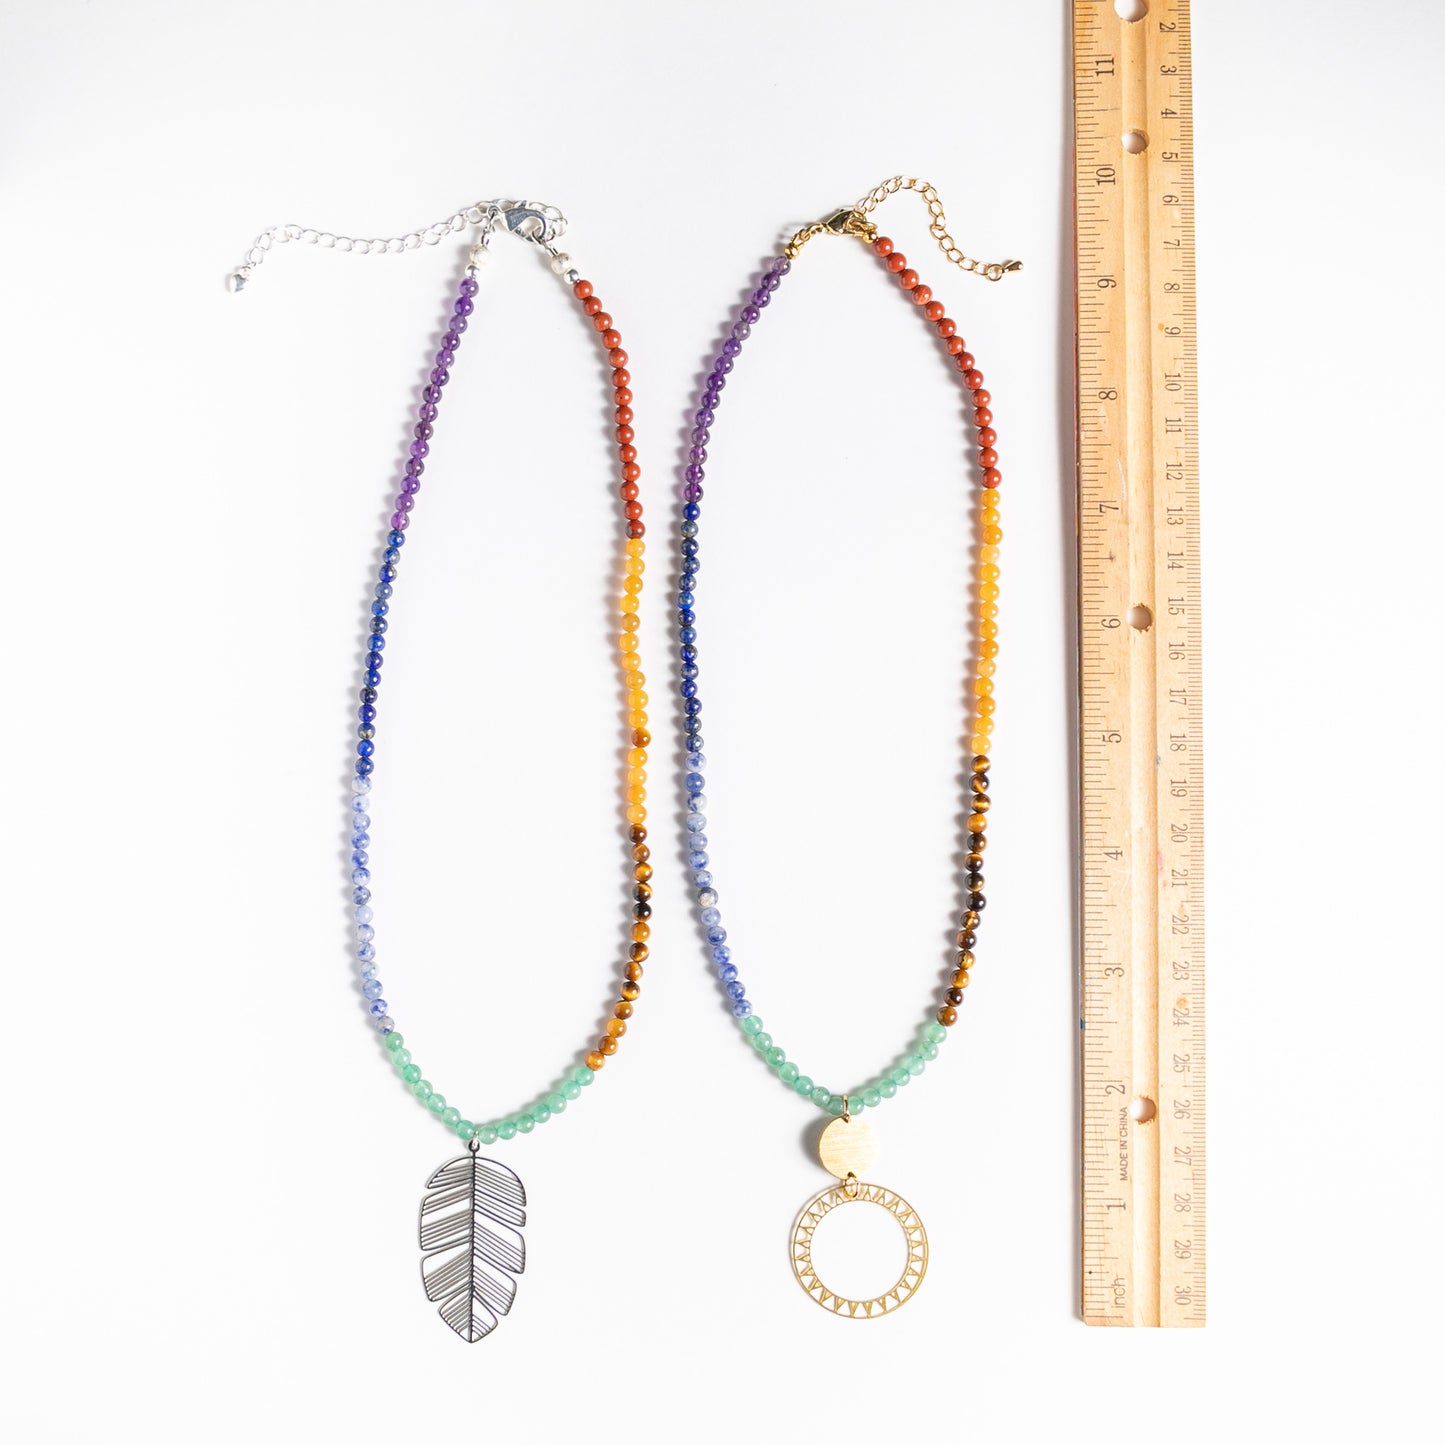 Chakra Beads Necklace with Nature Pendant